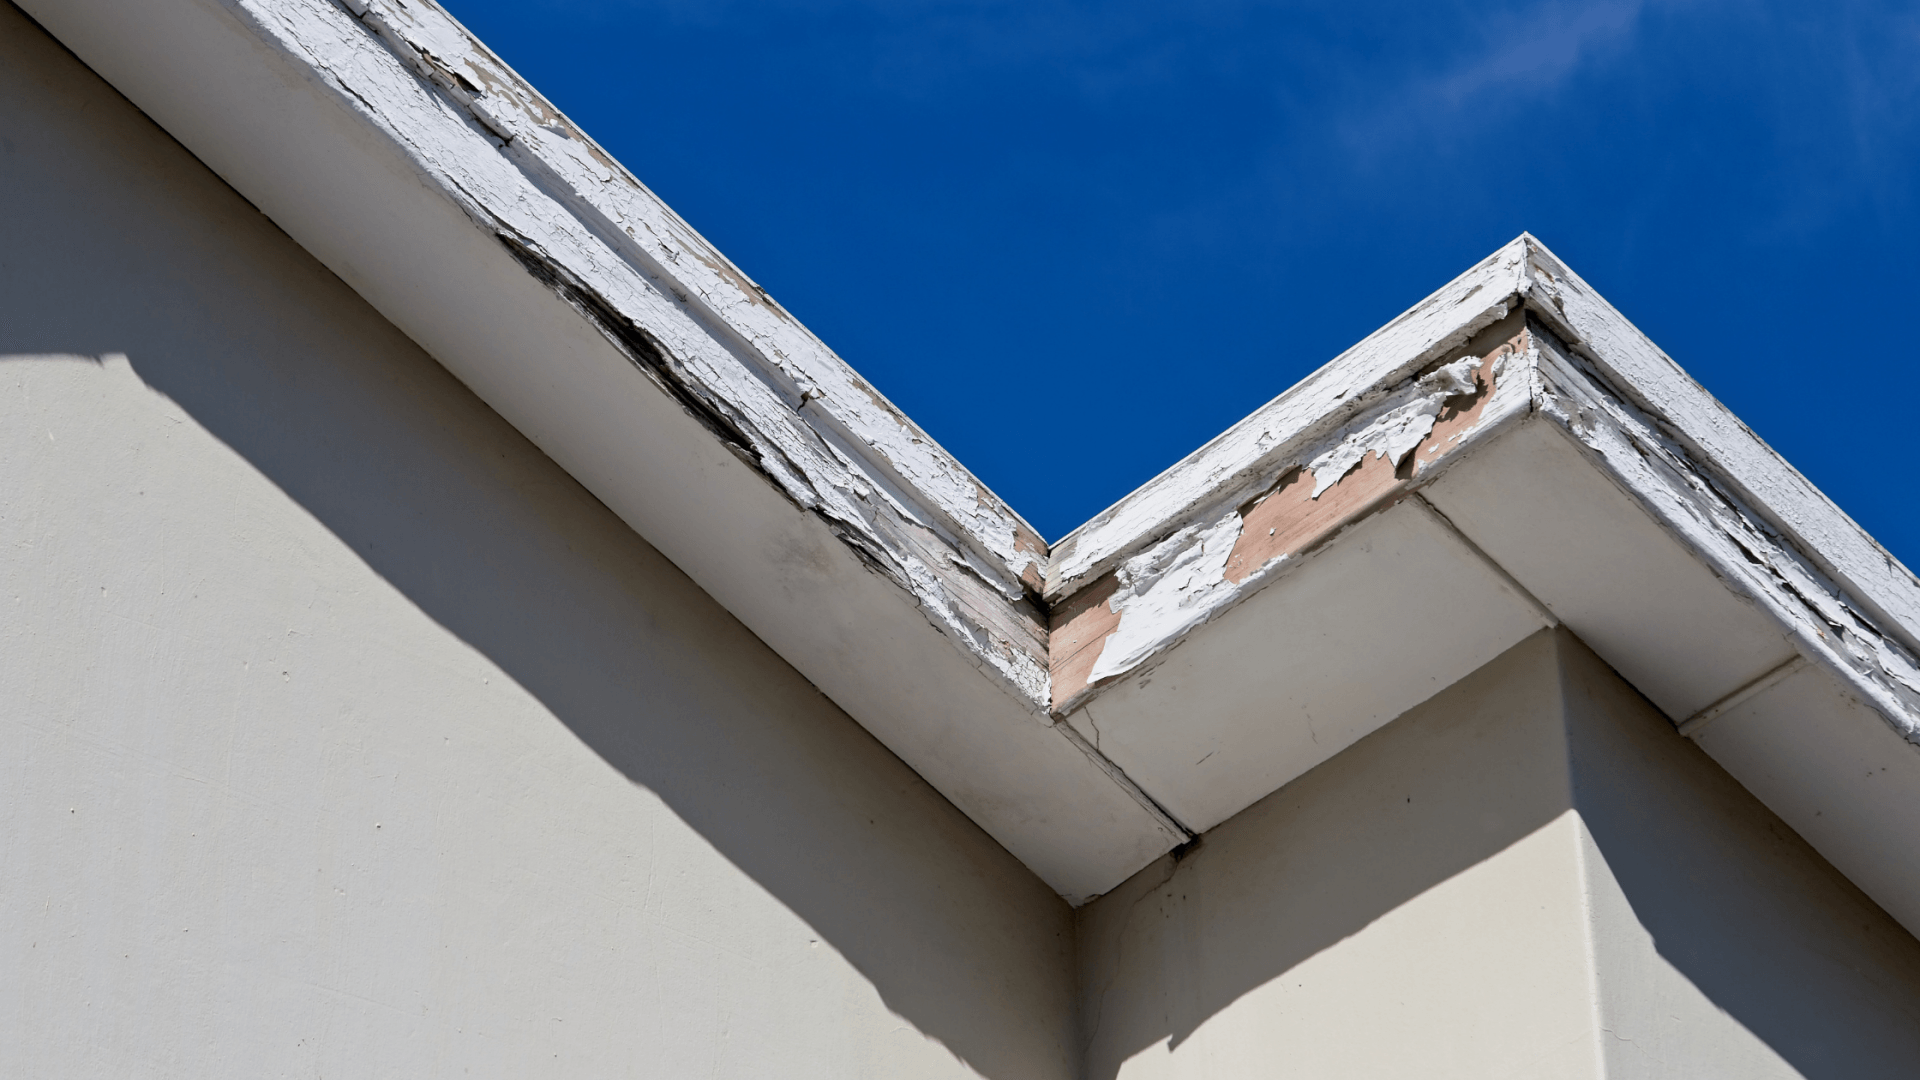 rotten fascia, broken fascia, roof repairs, roof replacememt, best roofing contractor near me, sioux falls sd